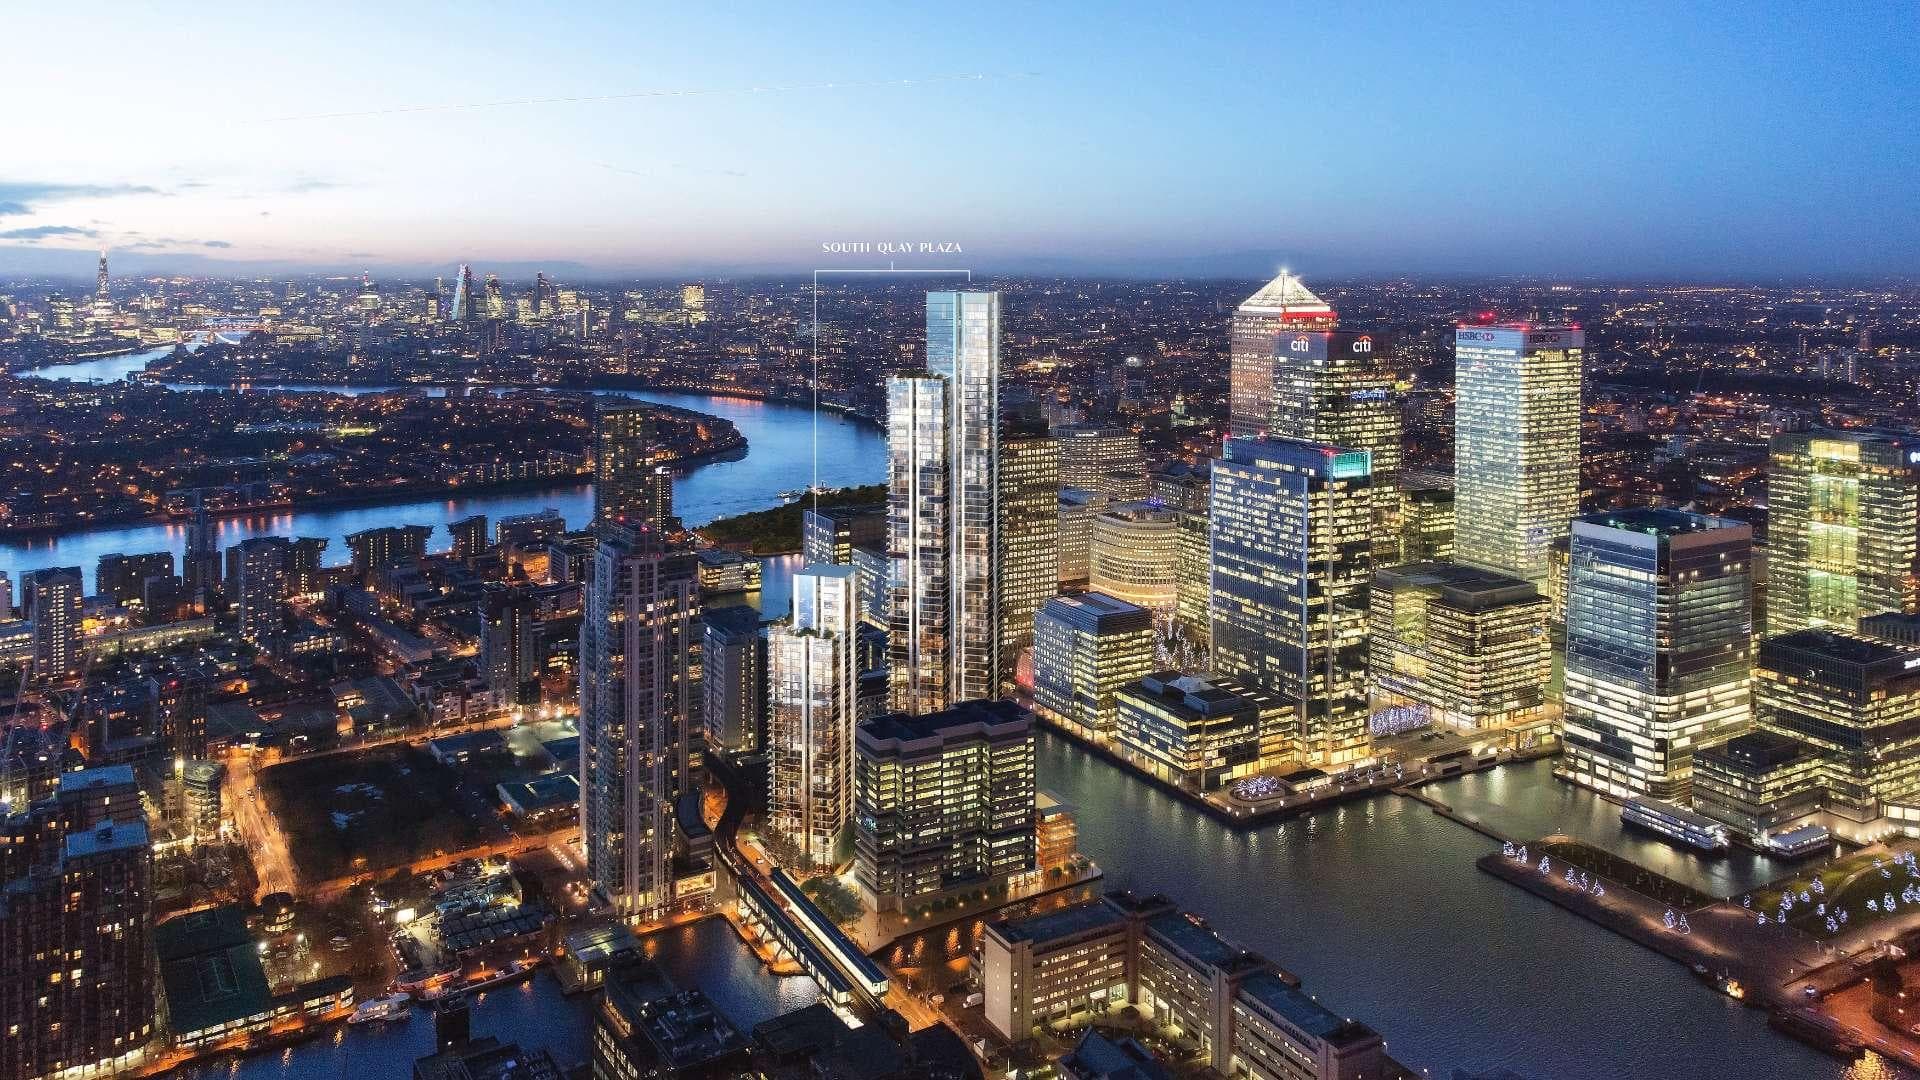 2 Bedroom Apartment For Sale Canary Wharf Lp17829 11c323ca4bed0700.jpg